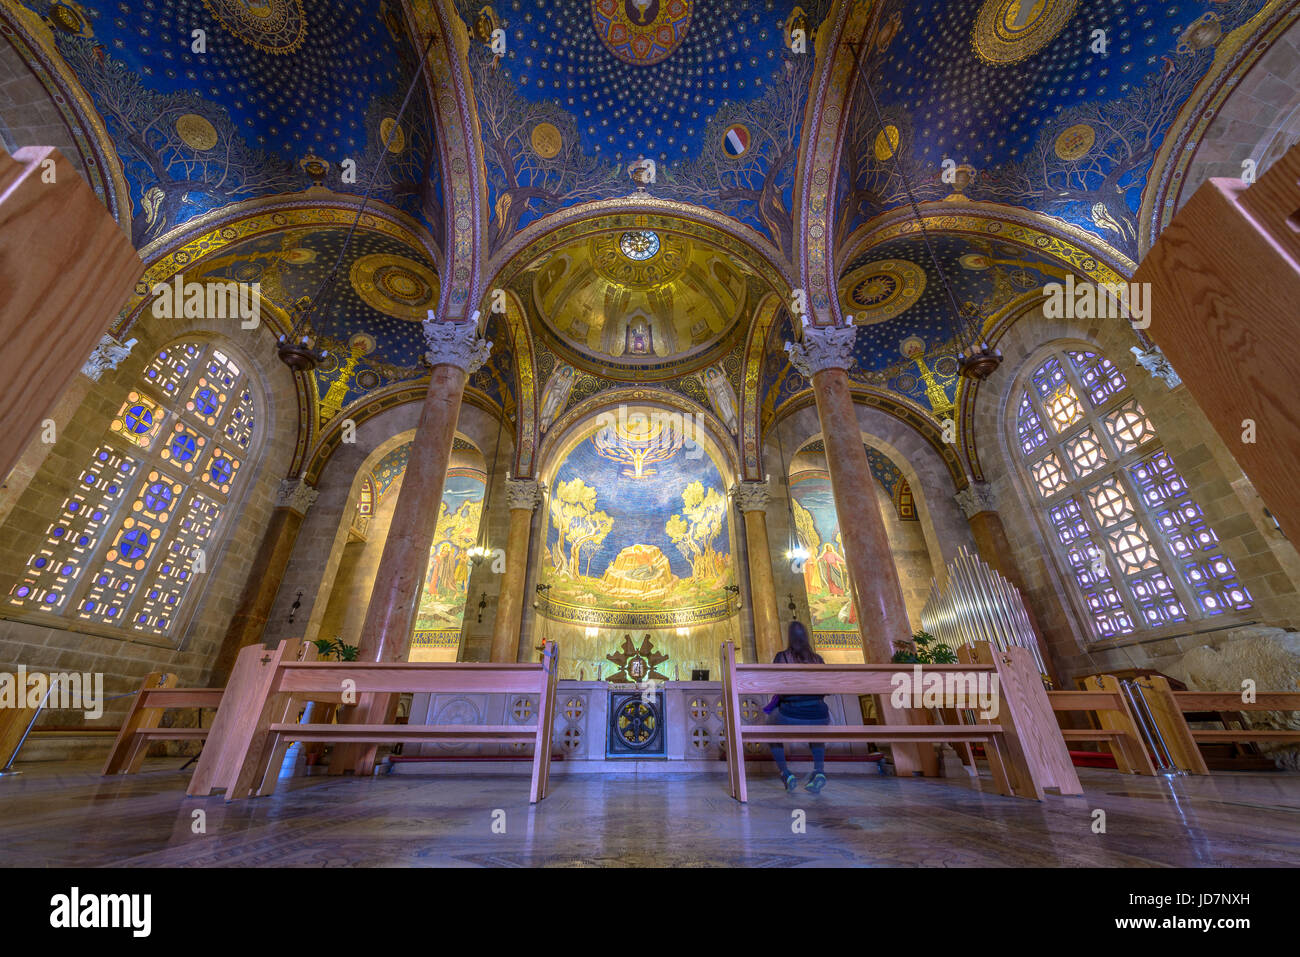 JERUSALEM, ISRAEL - April 18, 2015: The interior of The Church of All Nations (Basilica of the Agony) in Jerusalem, Israel Stock Photo